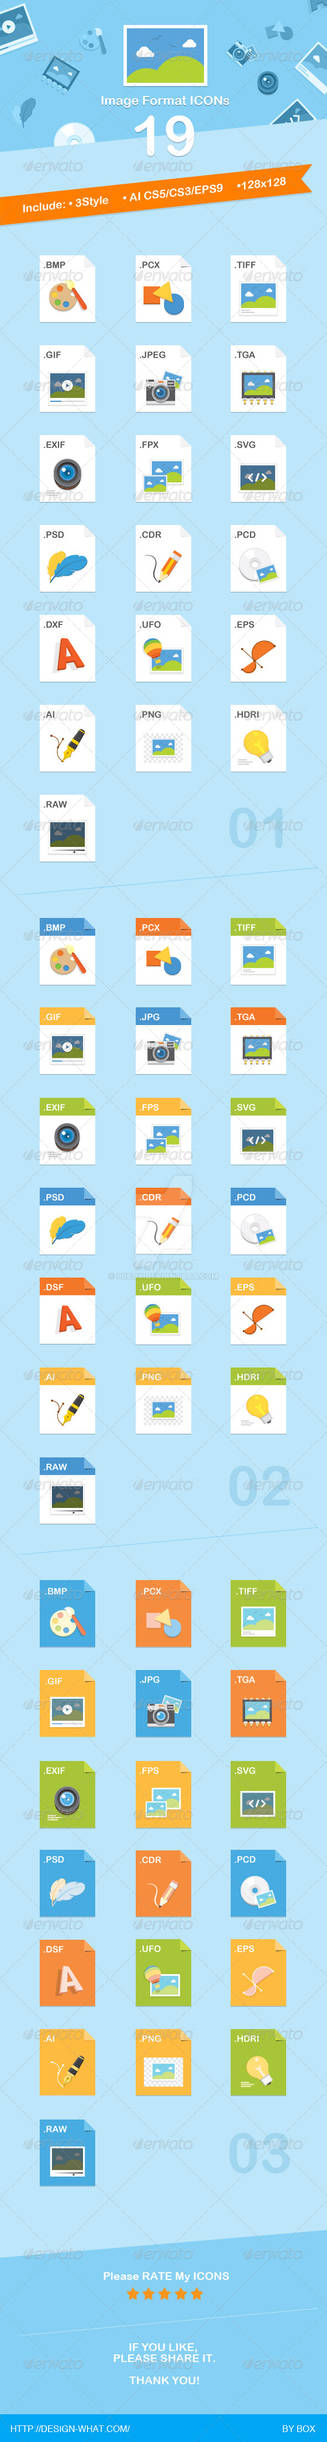 19 Image Format Icons